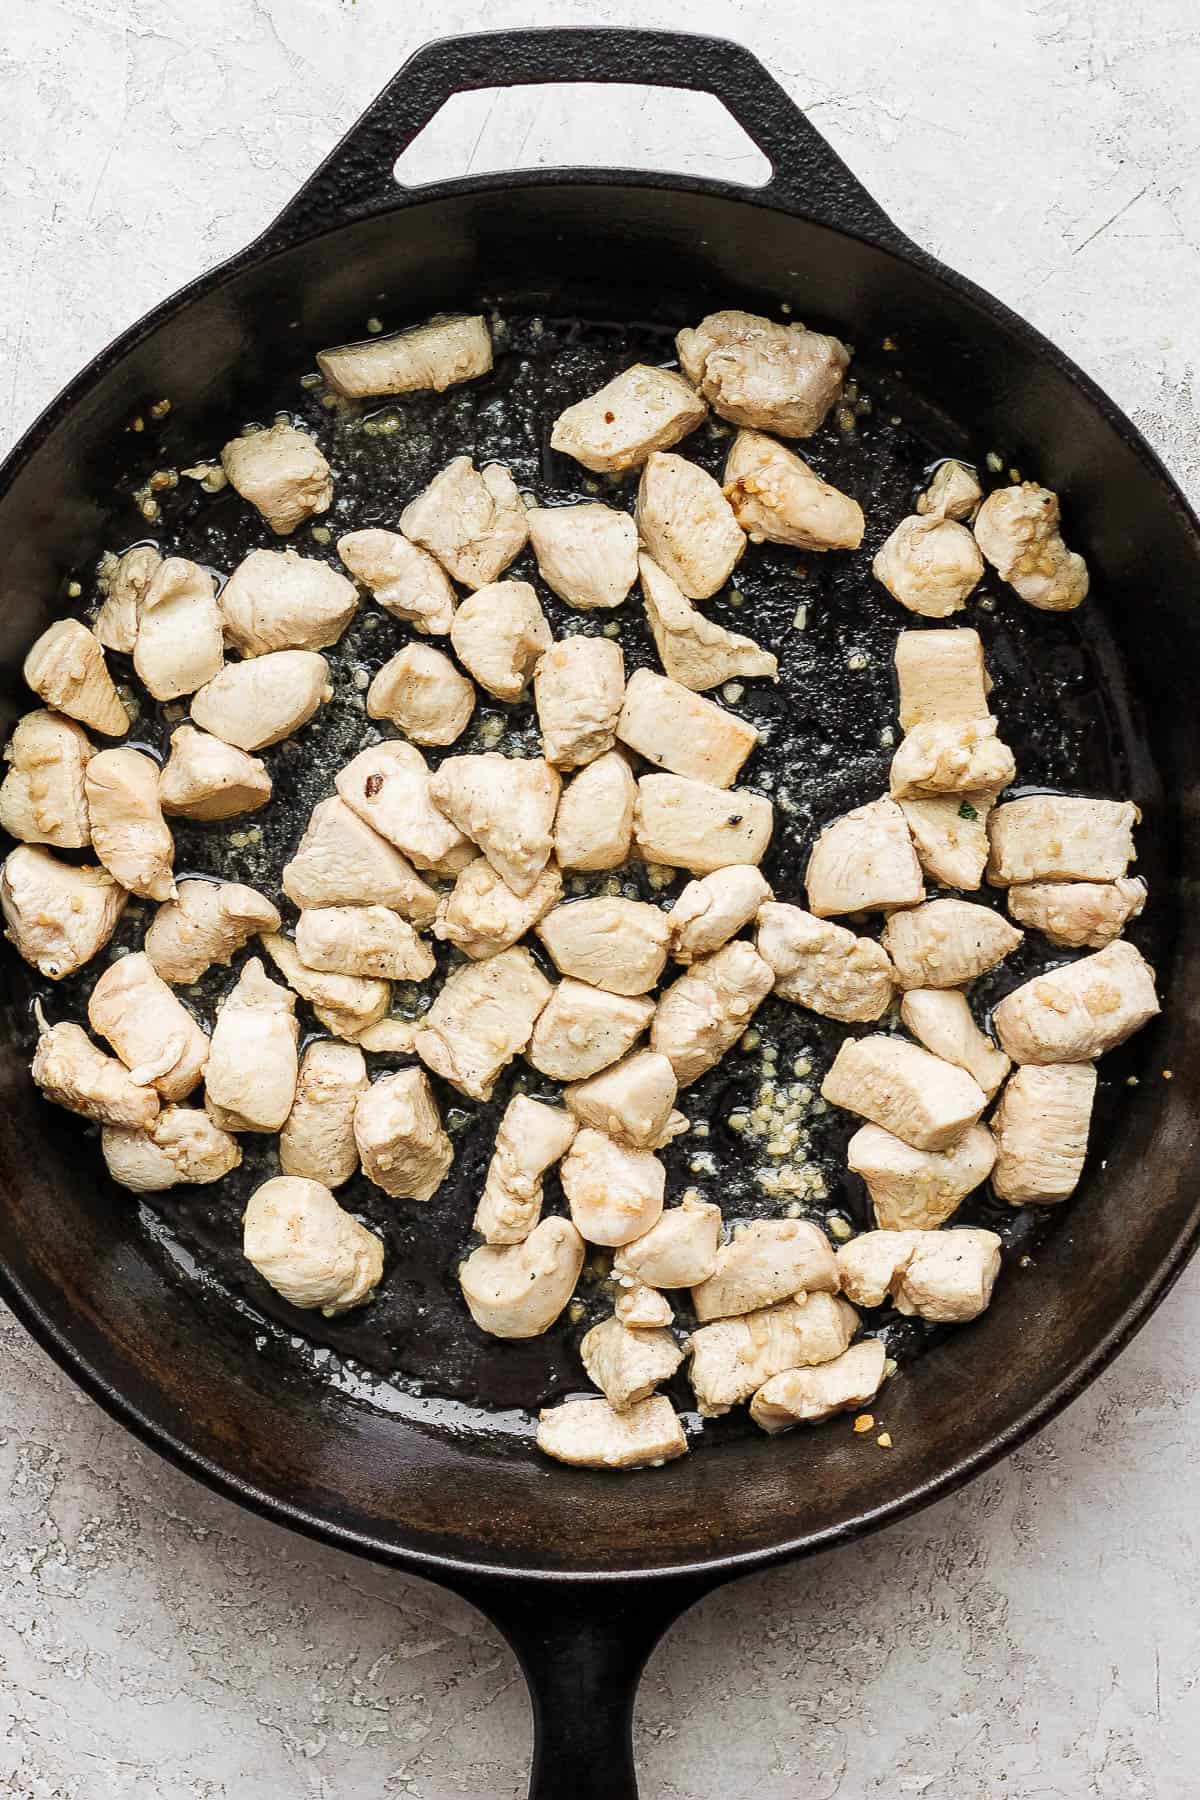 Cooked chunks of chicken in the cast iron skillet with the garlic.